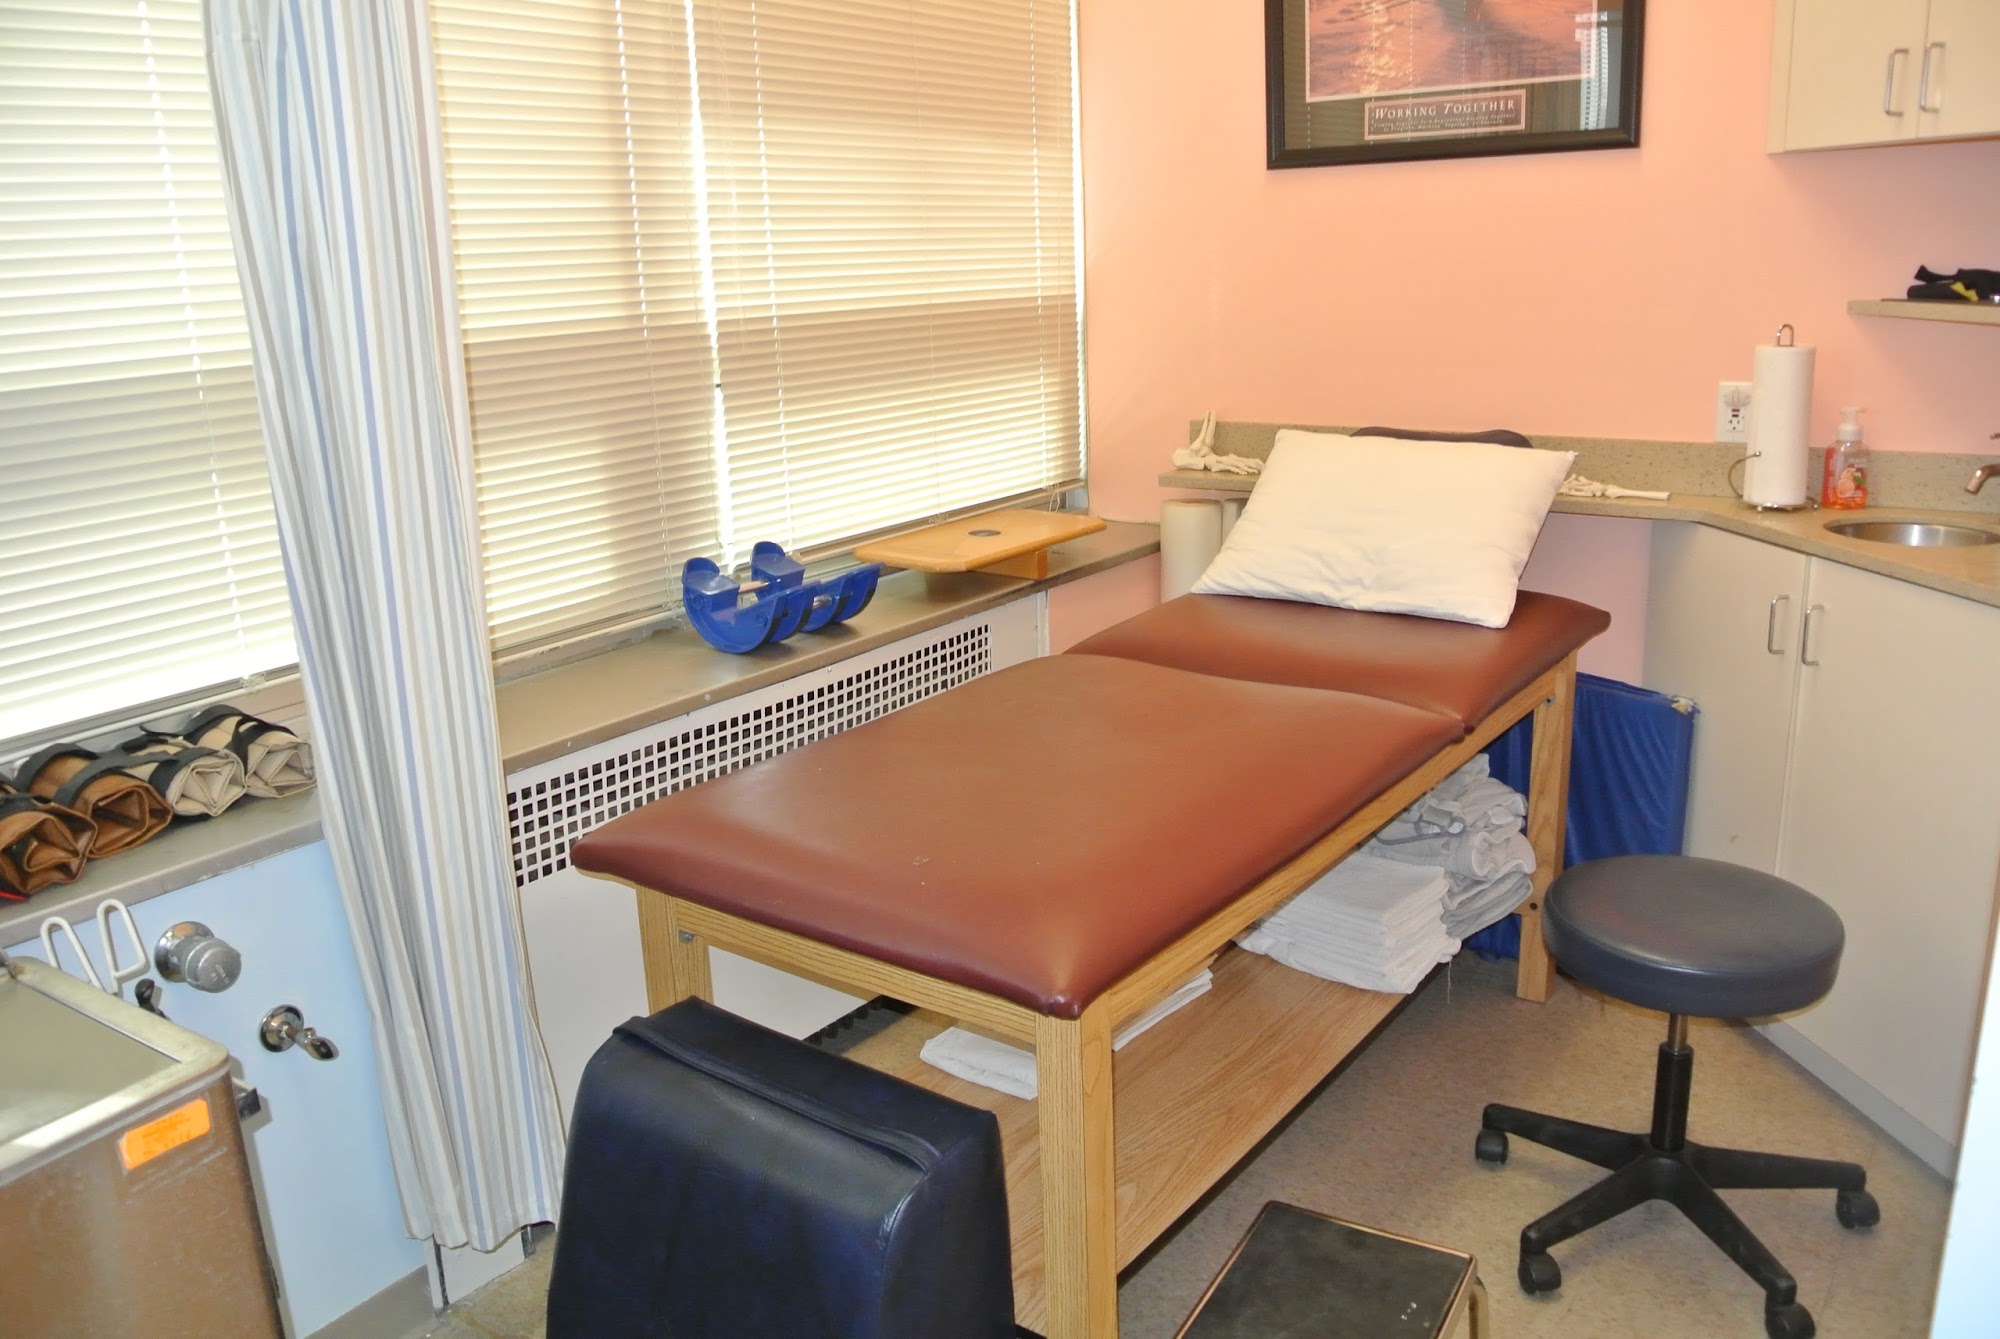 Acosta Physical Therapy